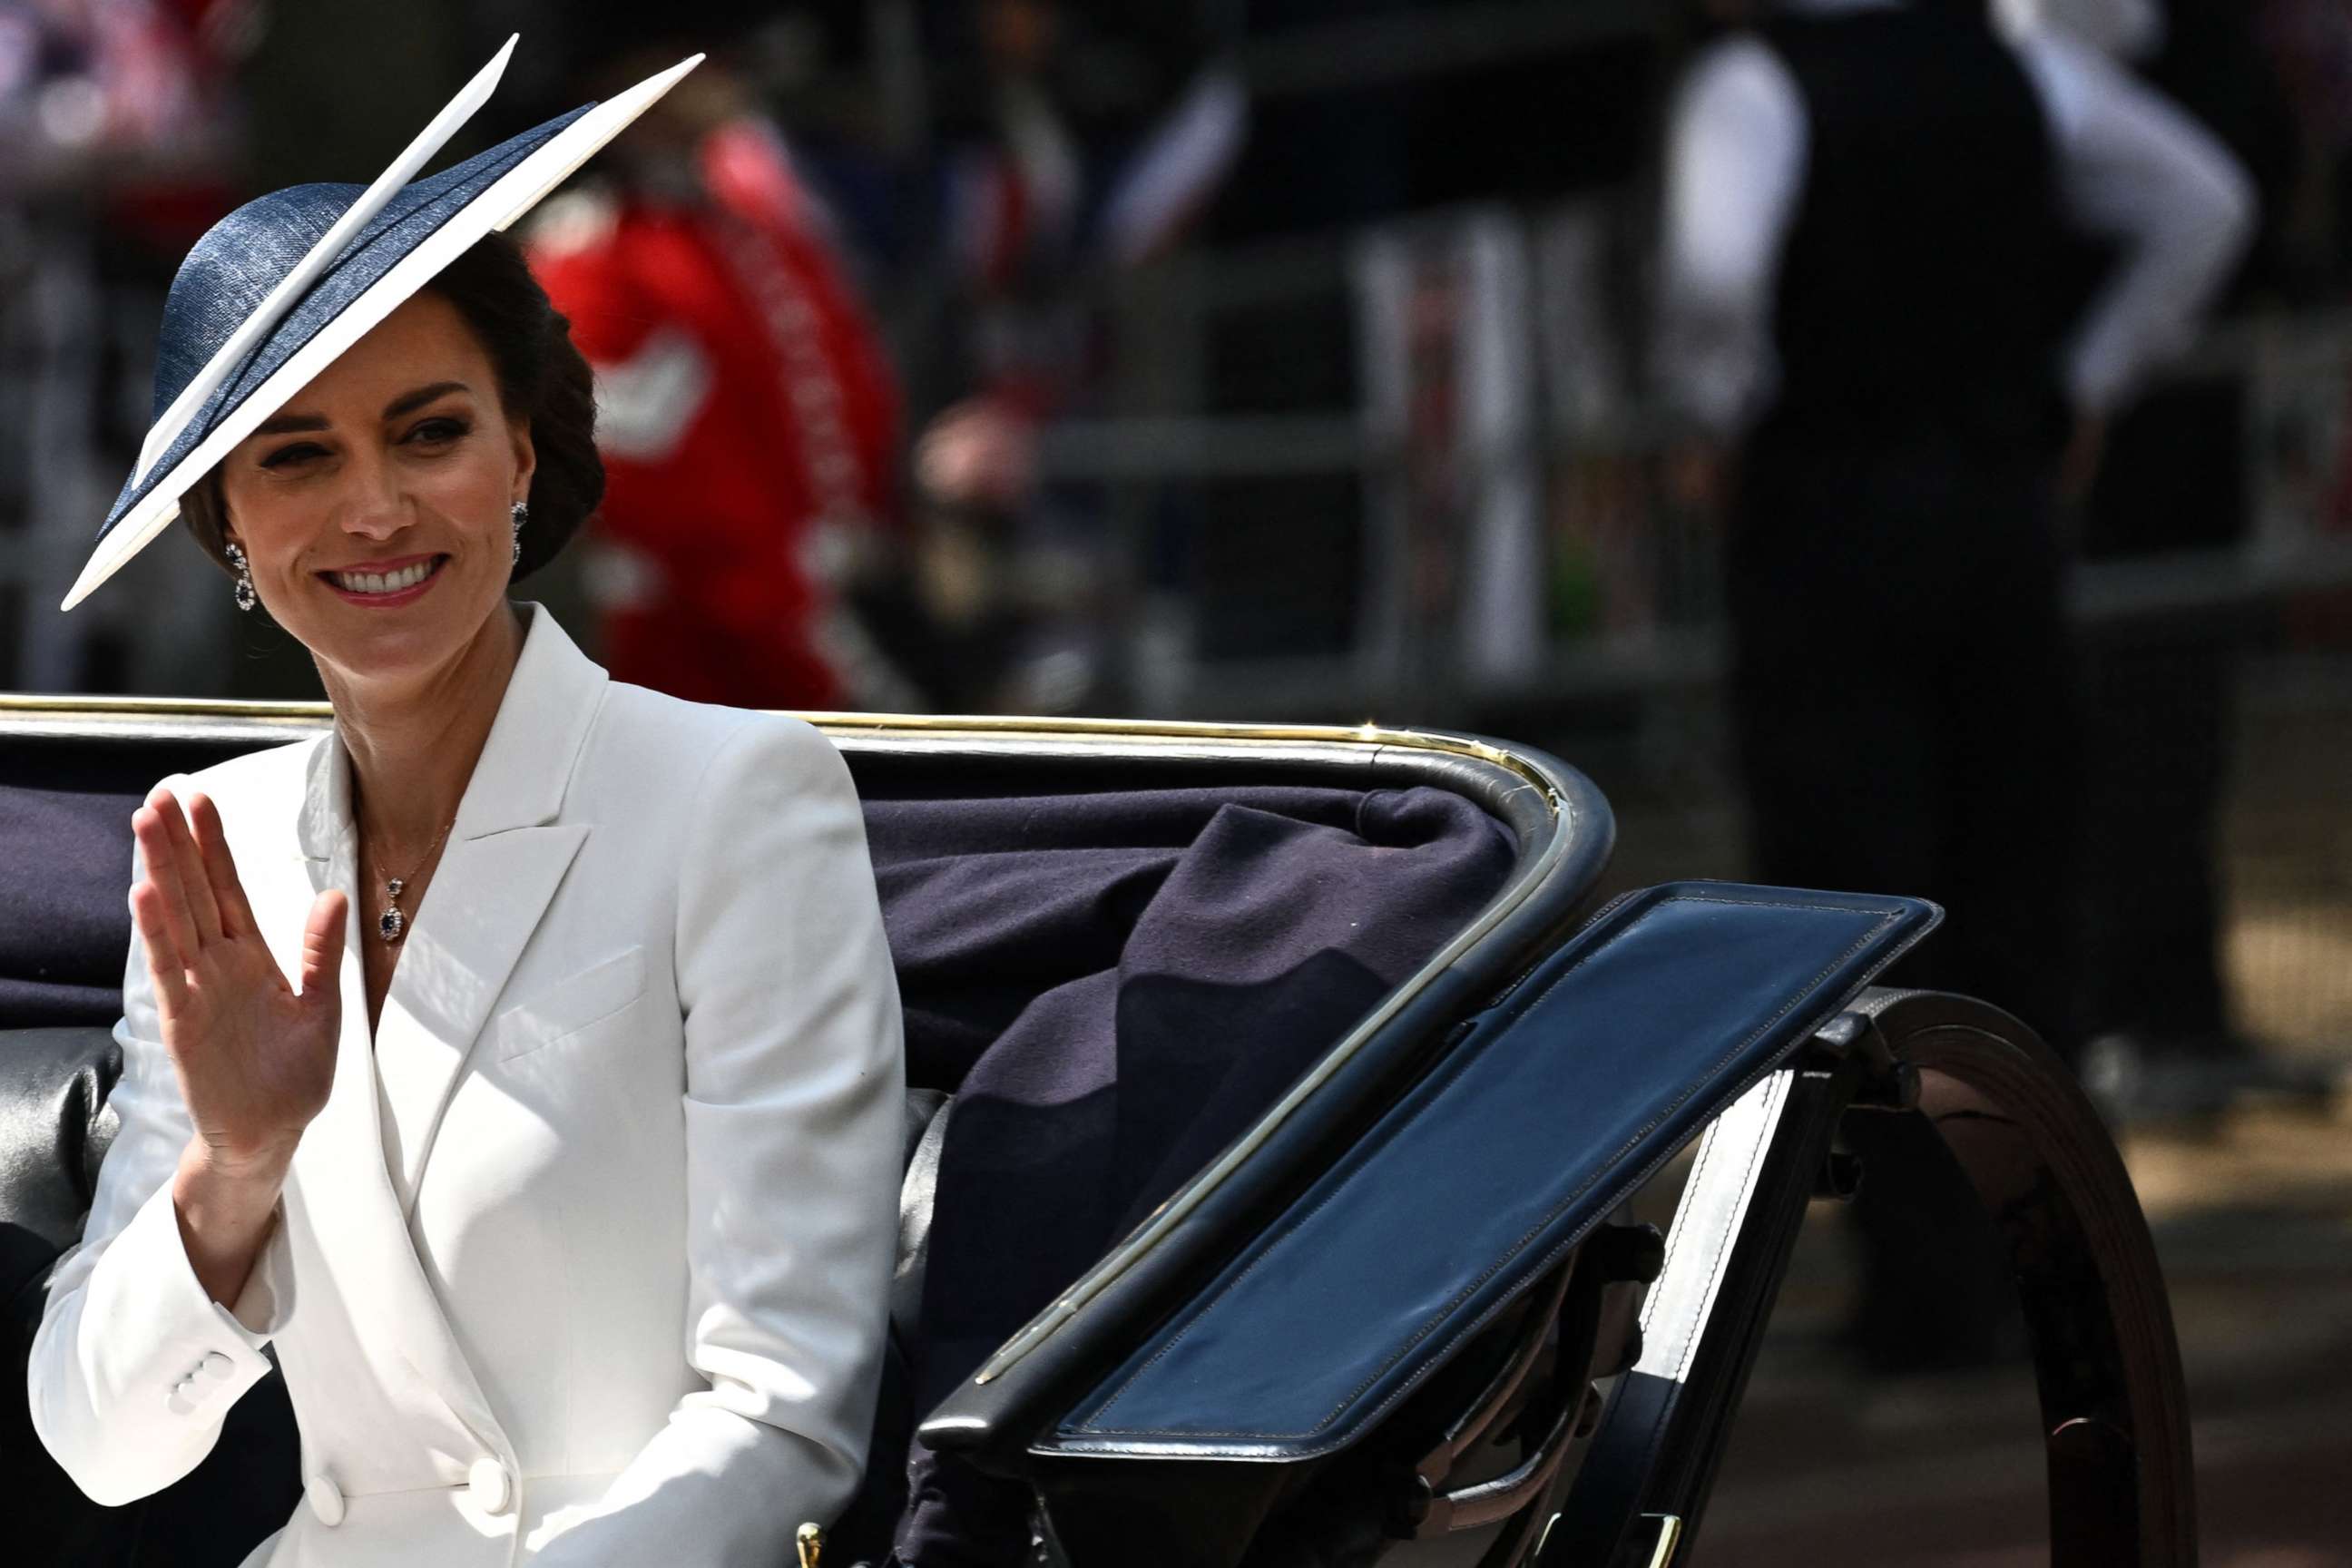 PHOTO: Britain's Catherine, Duchess of Cambridge, waves to the public as she arrives on a carriage to attend the Queen's Birthday Parade, the Trooping the Color, as part of Queen Elizabeth II's platinum jubilee celebrations, in London, June 2, 2022.